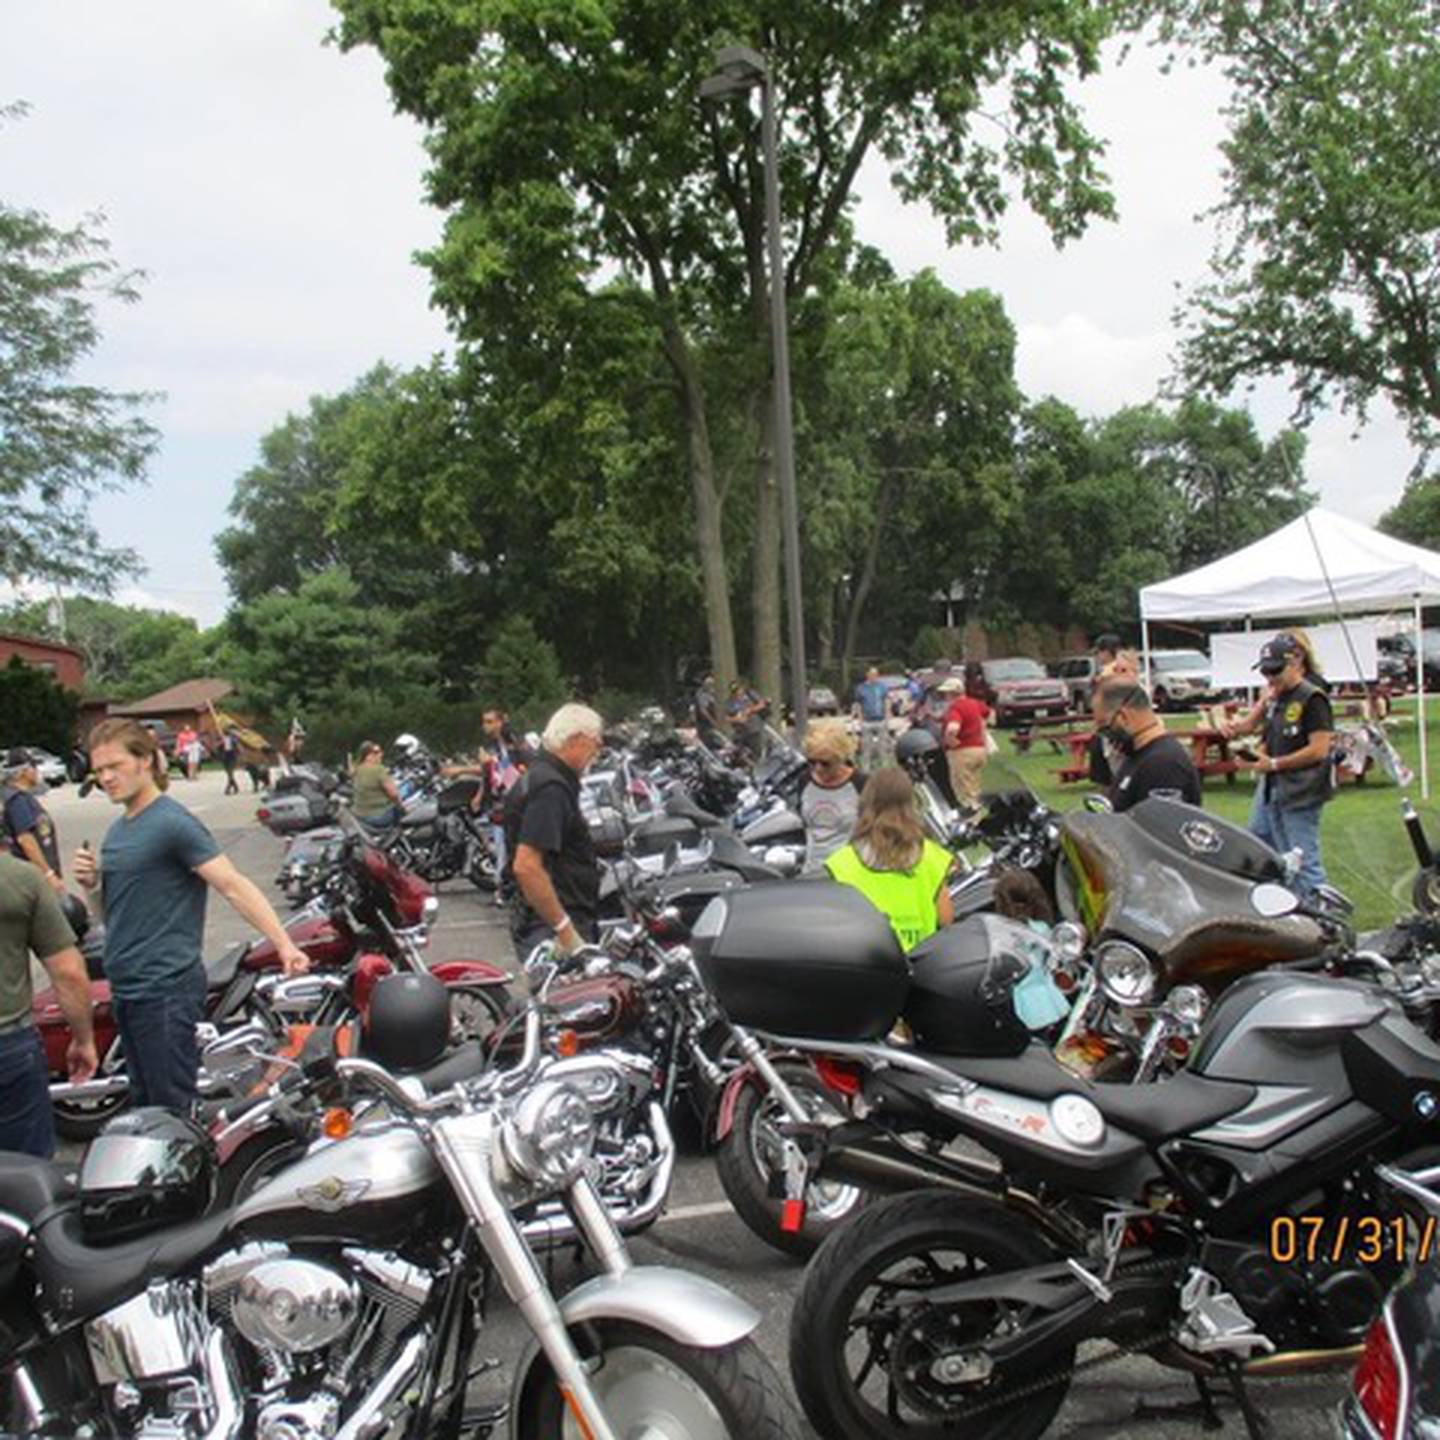 AllenForce’s 2022 "All In For Veterans" motorcycle (car, bike, truck) run will be held on Sept. 17. It will begin in St. Charles and end in Plainfield. The event raises money to help local veterans and raise awareness of suicide rates in veterans.